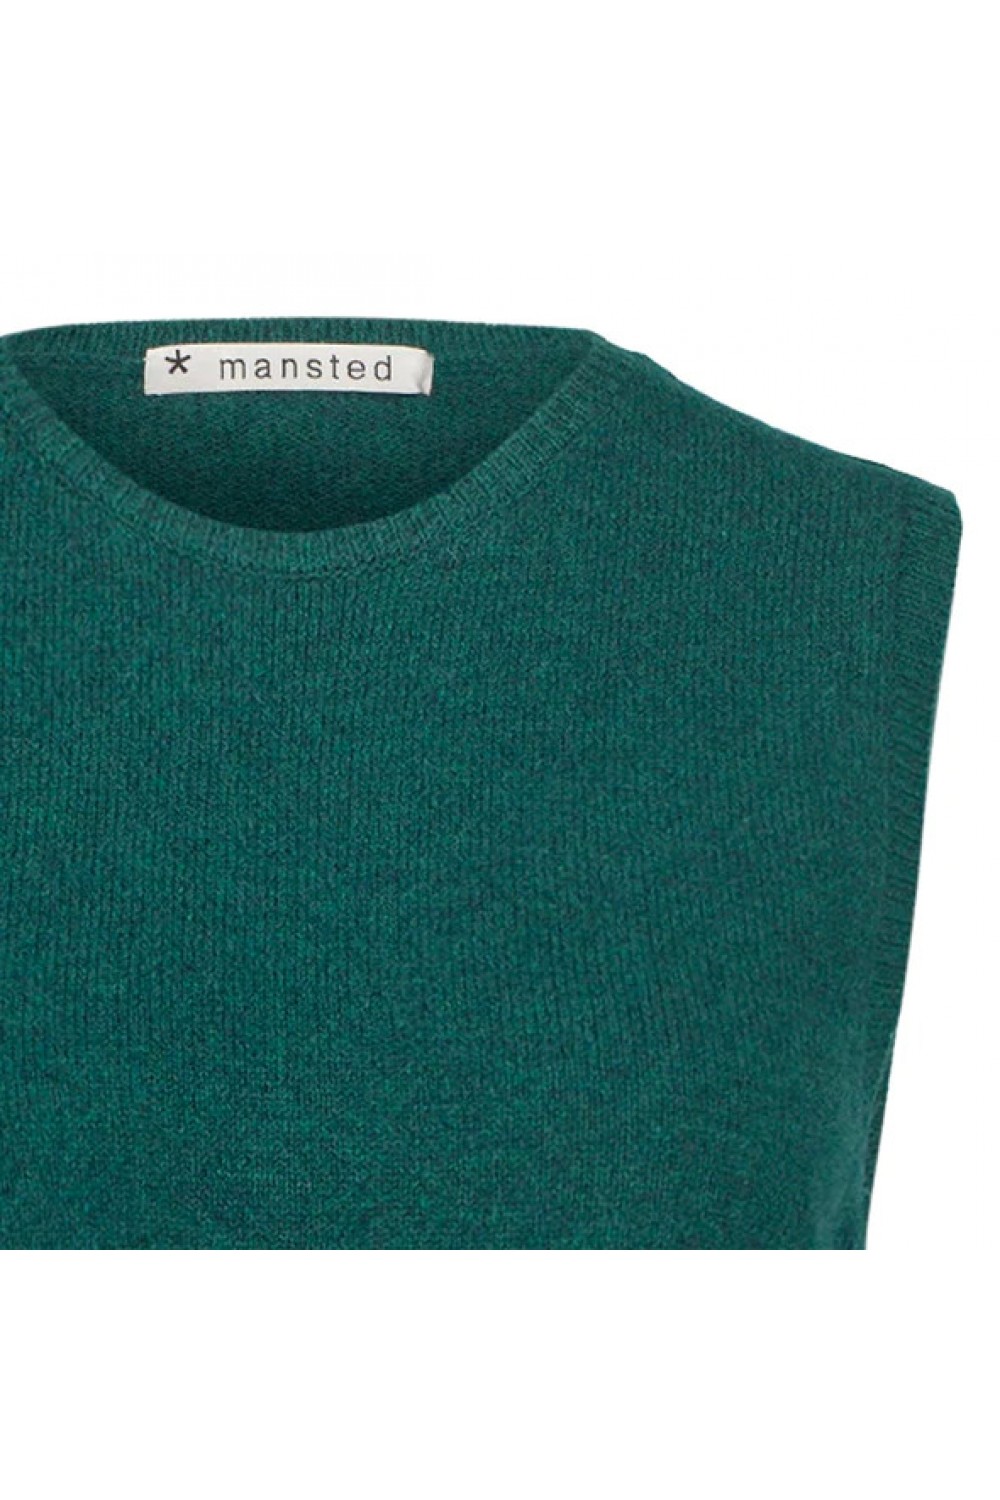 Mansted Mitos Lambswool Slip Over Green